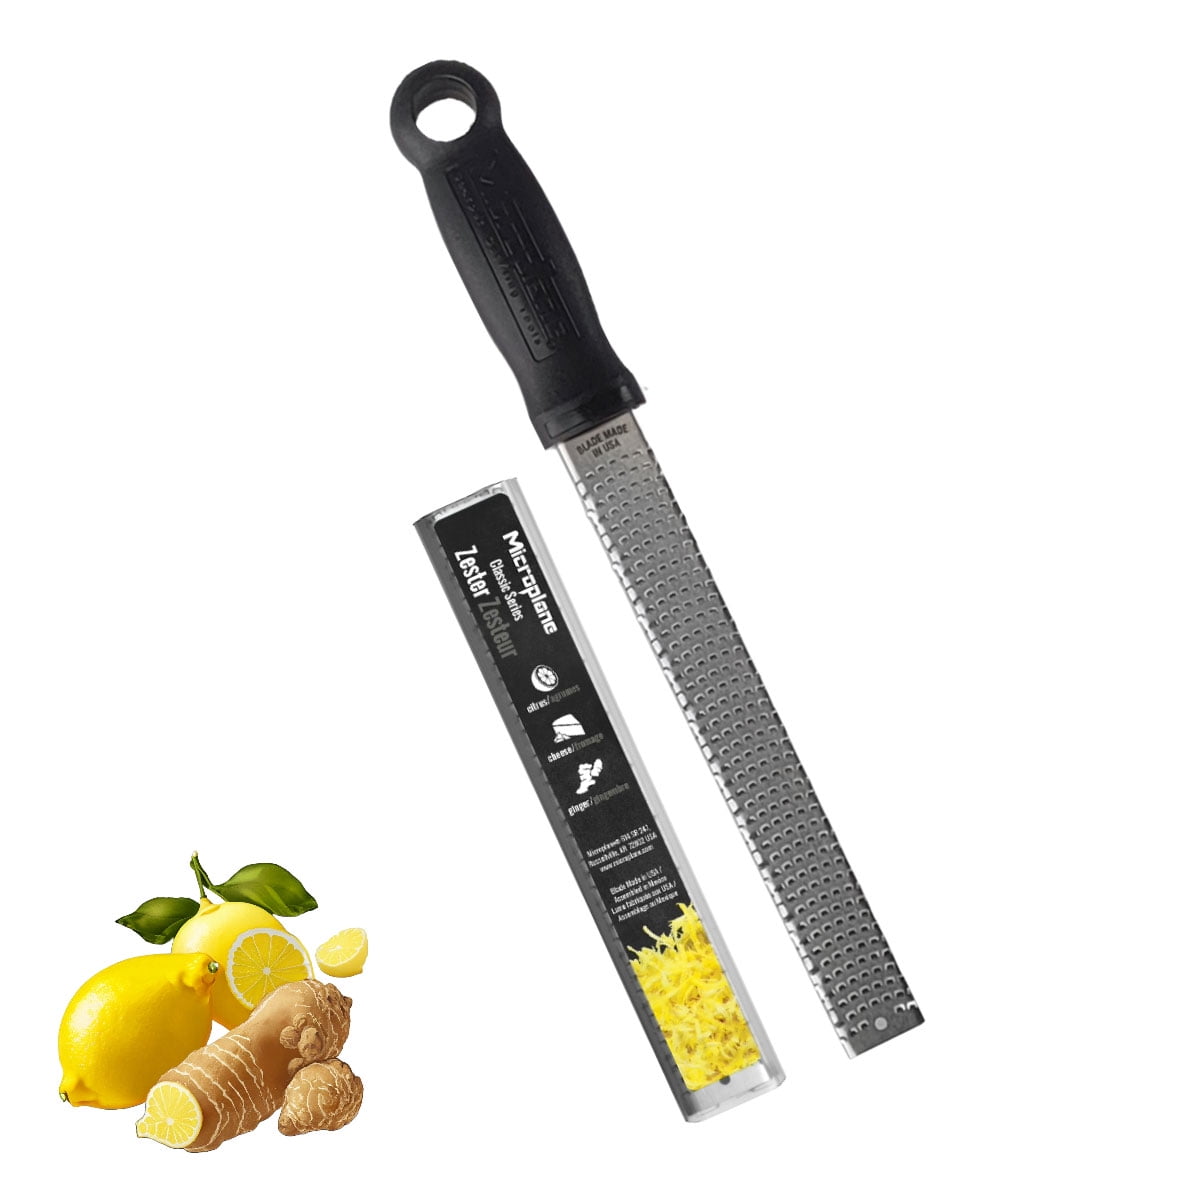 You Need a Microplane Grater If You Love Garlic Bread